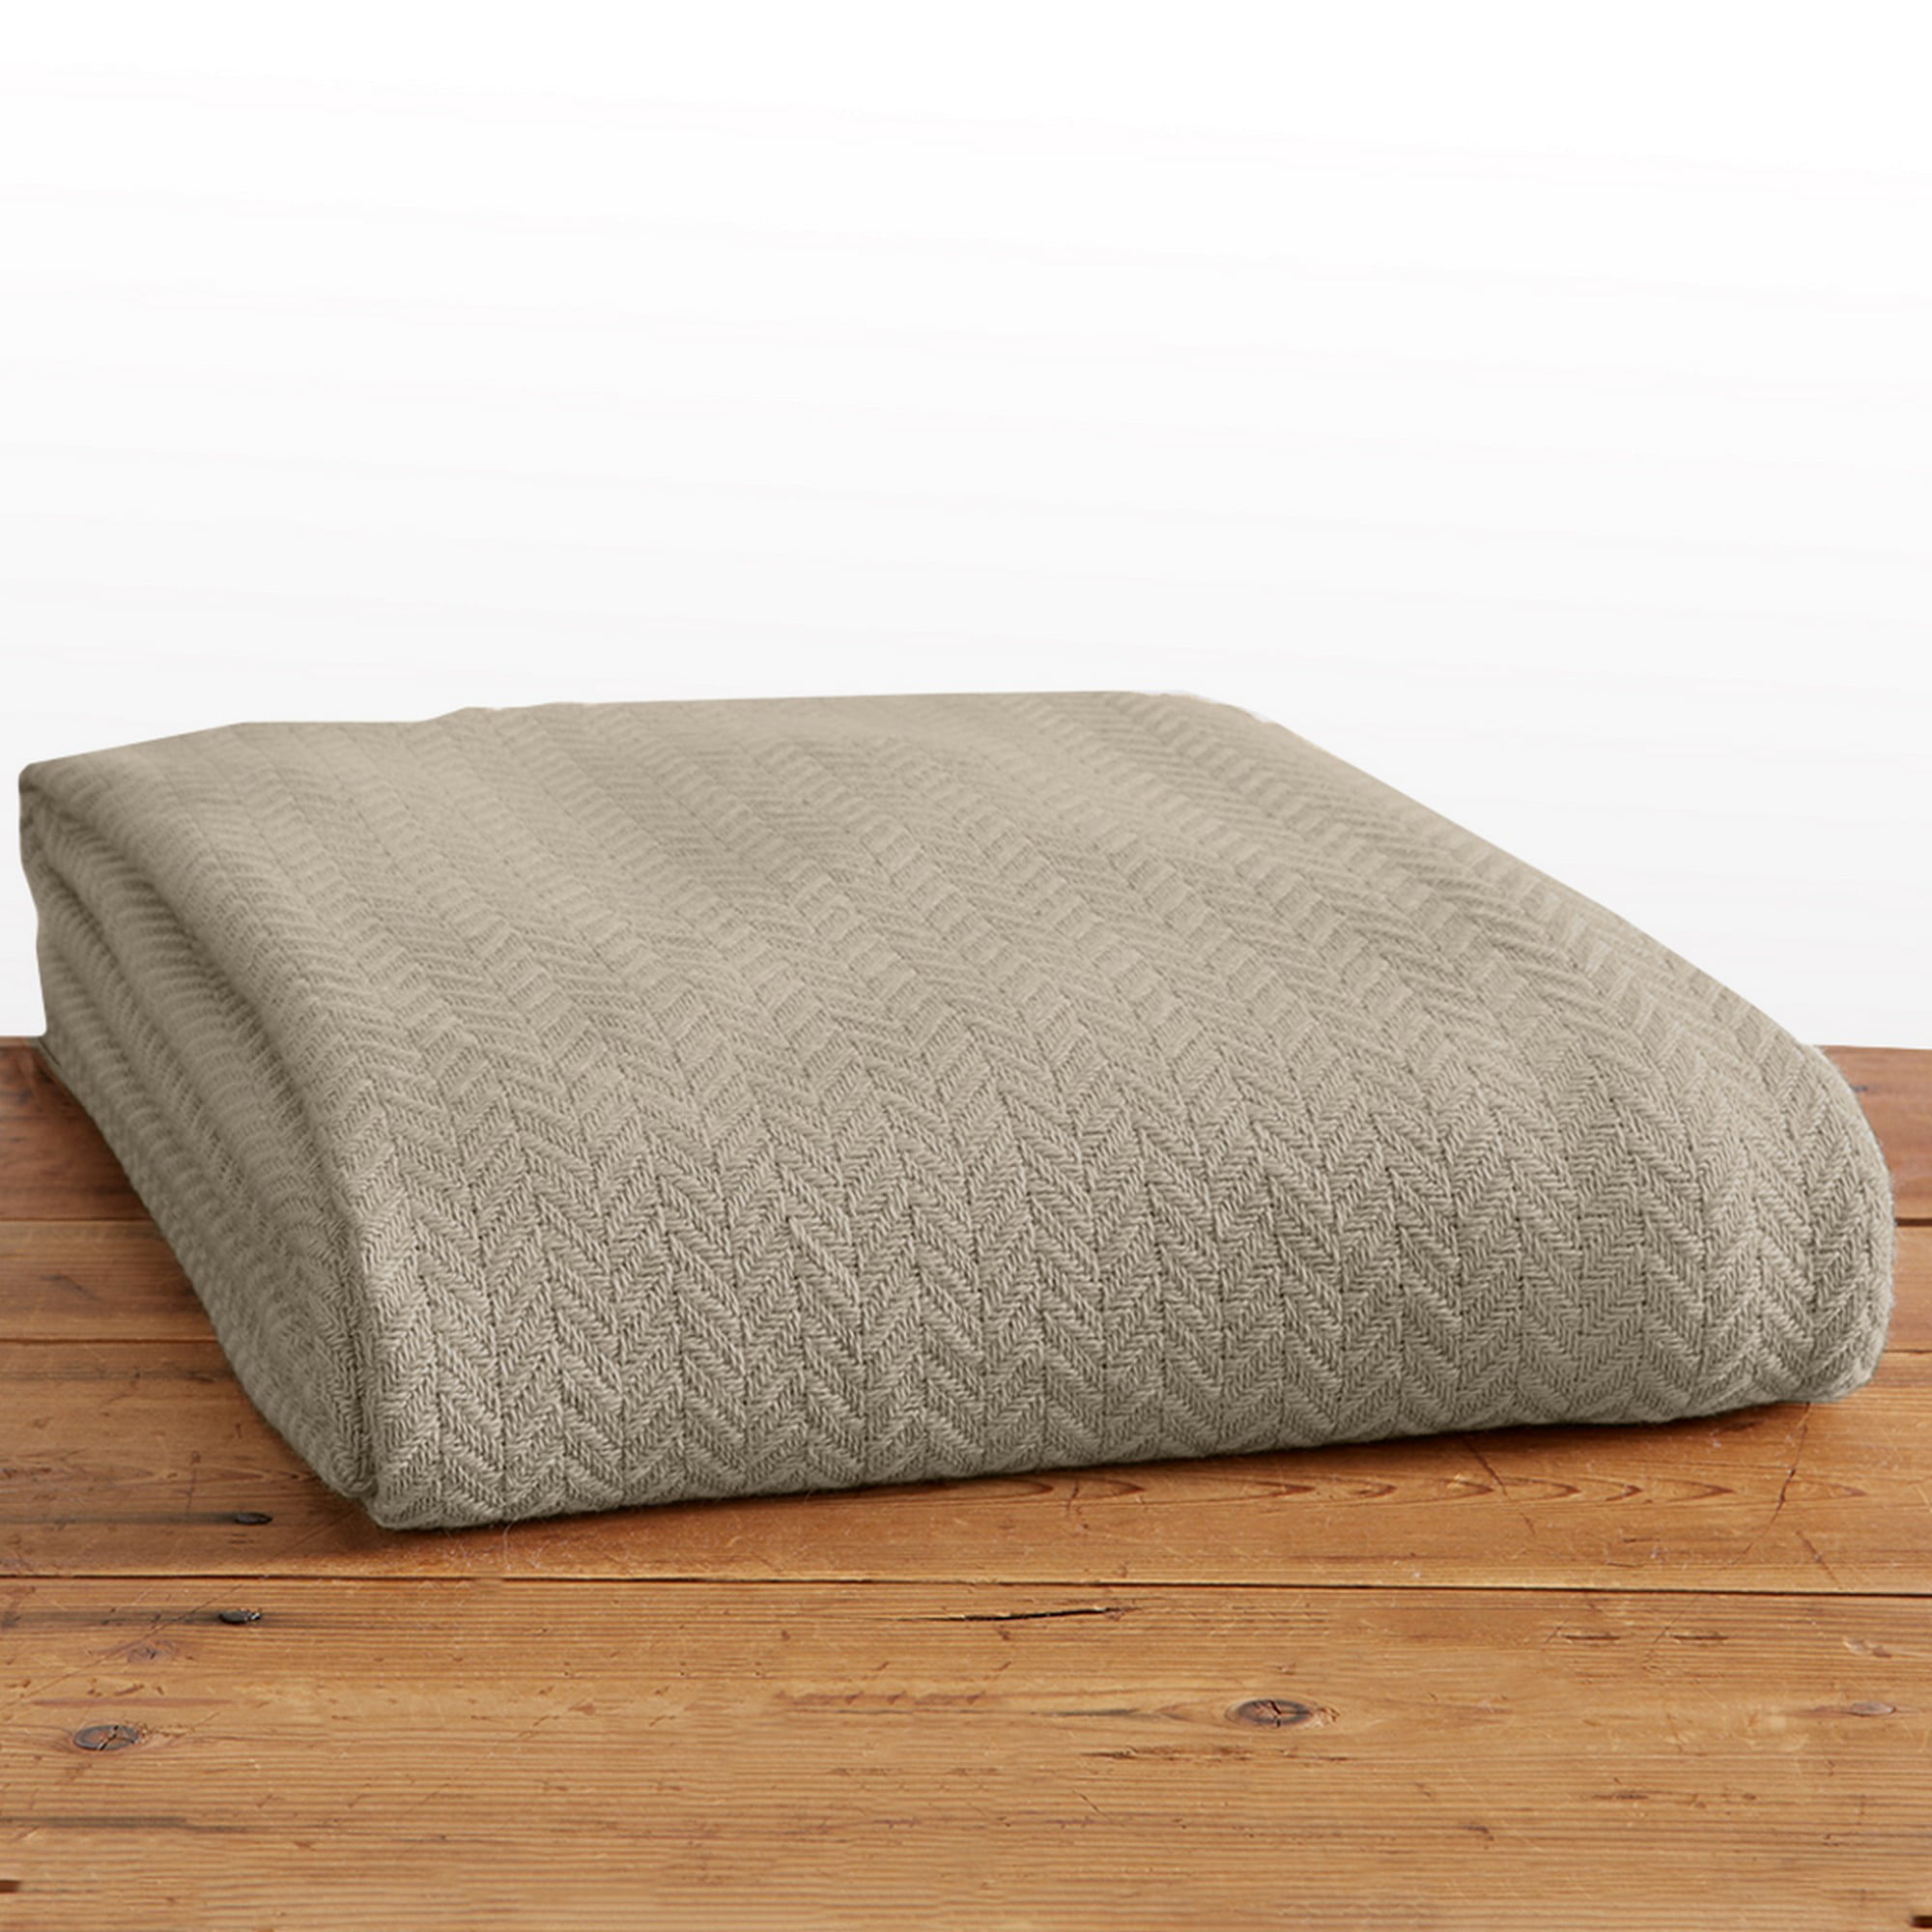 100% Ringspun Cotton Textured Weave Blanket Aurelie Collection King, Lilac Lightweight and Soft Perfect for Layering